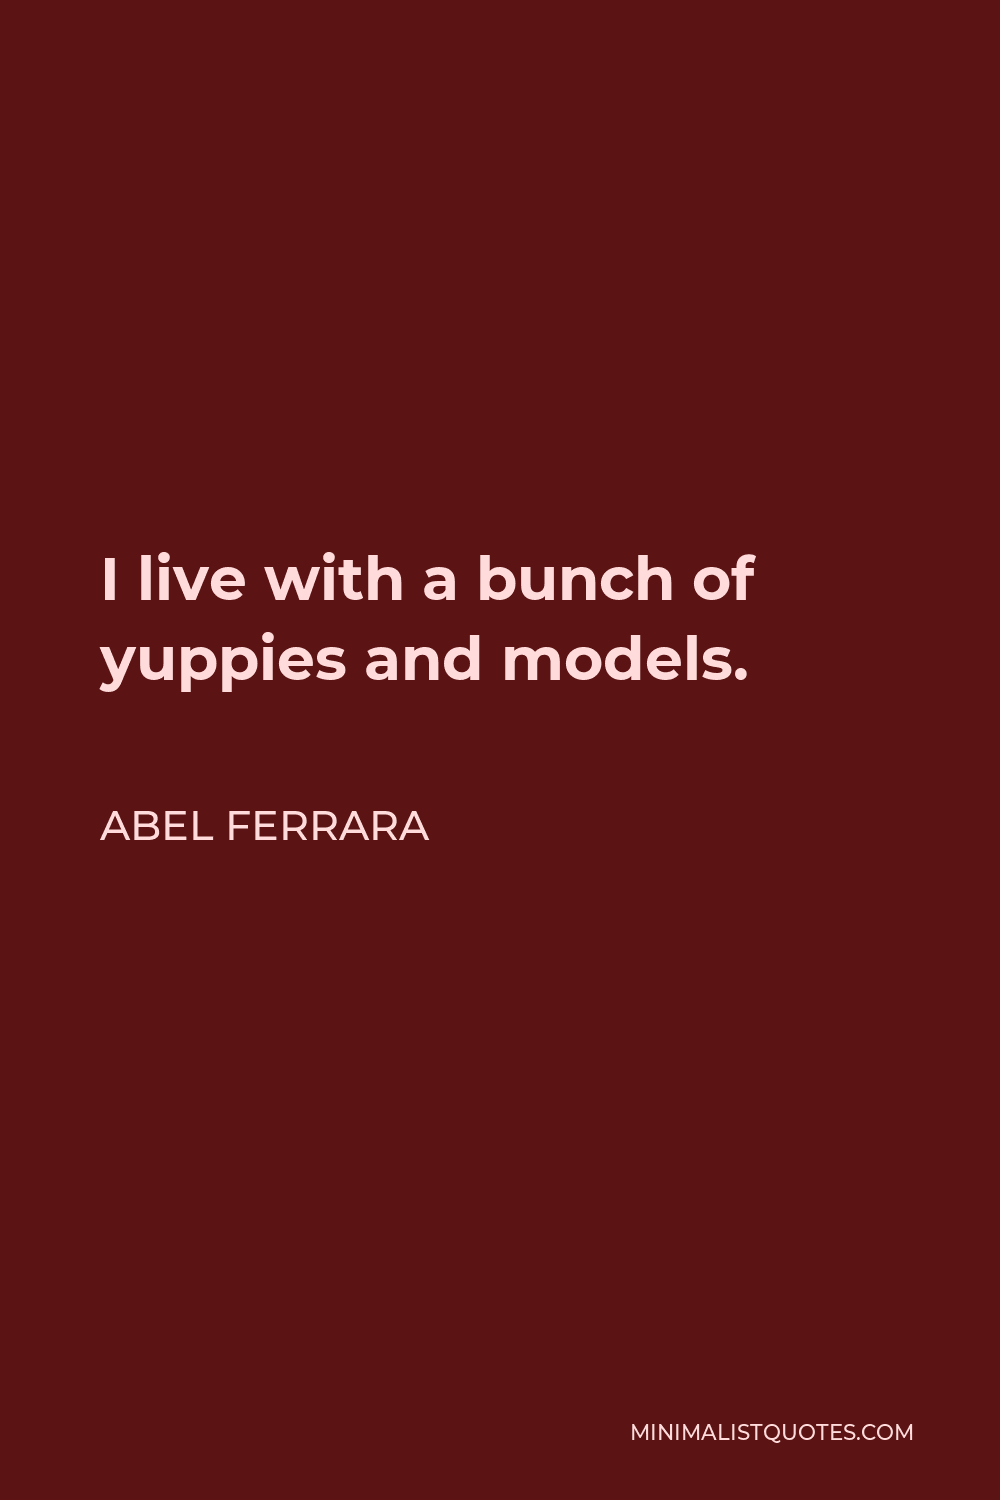 Abel Ferrara Quote - I live with a bunch of yuppies and models.